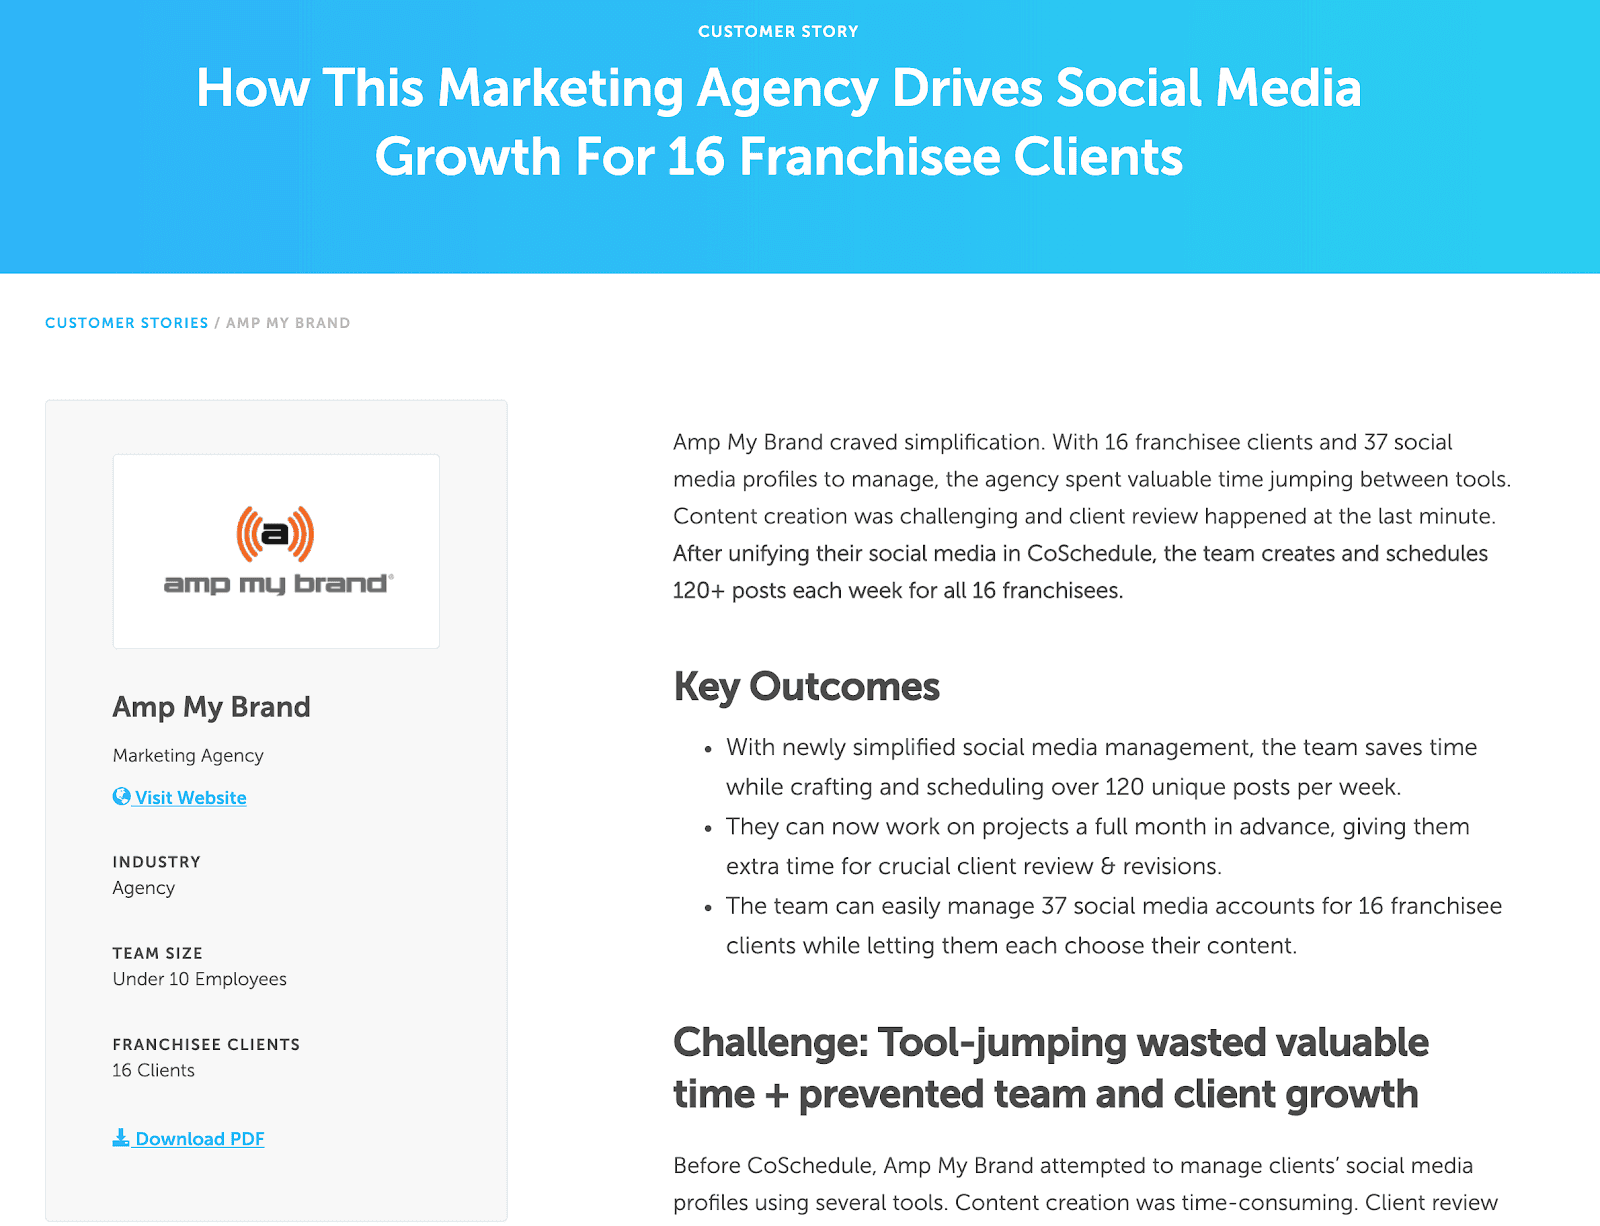 An example from a customer success story form Amp My Brand